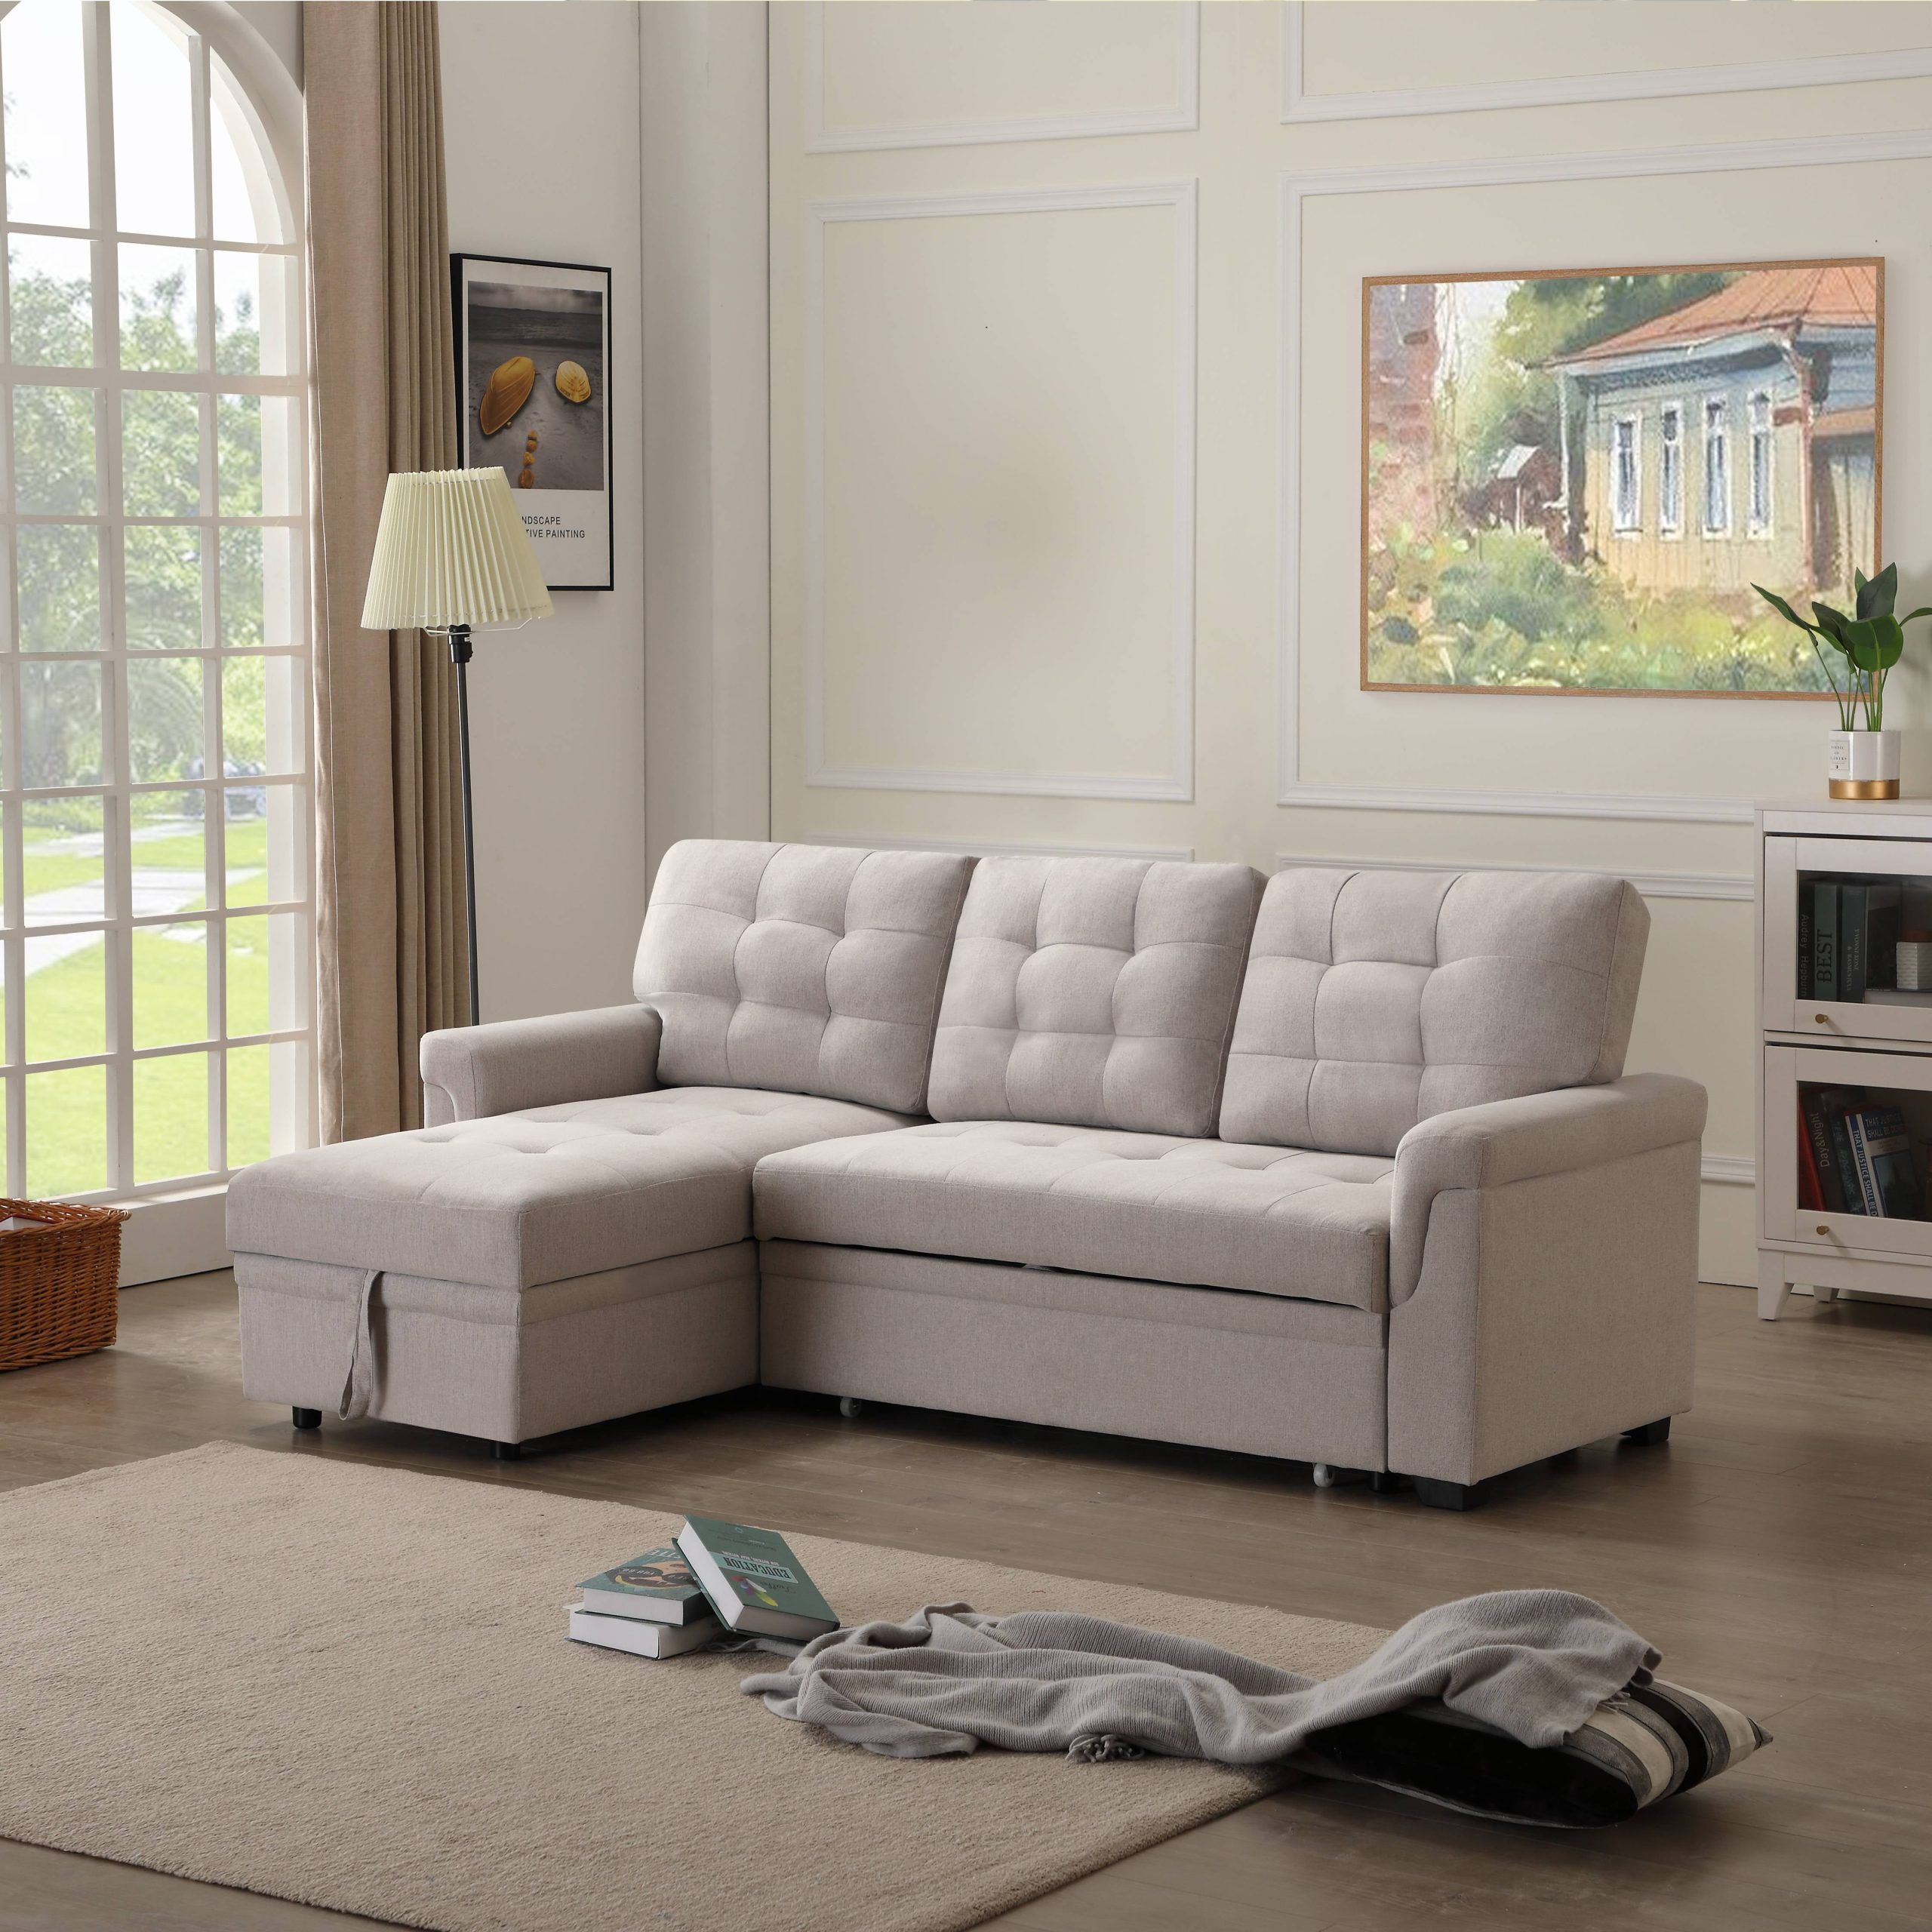 L Shaped Sectional Sofa Bed With Reversible Chaise, 86"w Modern 3 Seat Intended For Beige L Shaped Sectional Sofas (View 6 of 20)